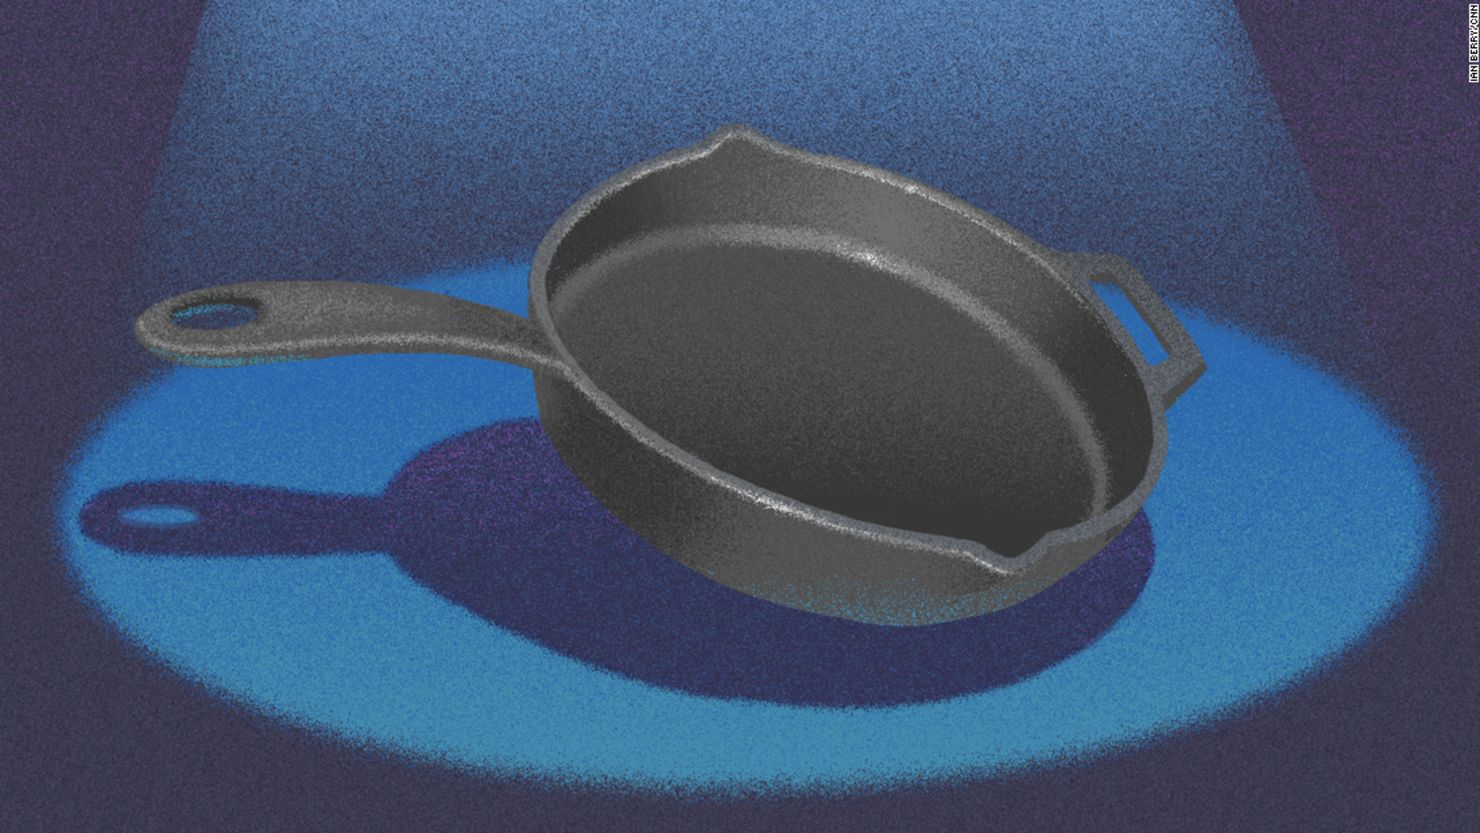 This Cast-Iron Cookware Looks Just Like A Luxury Brand